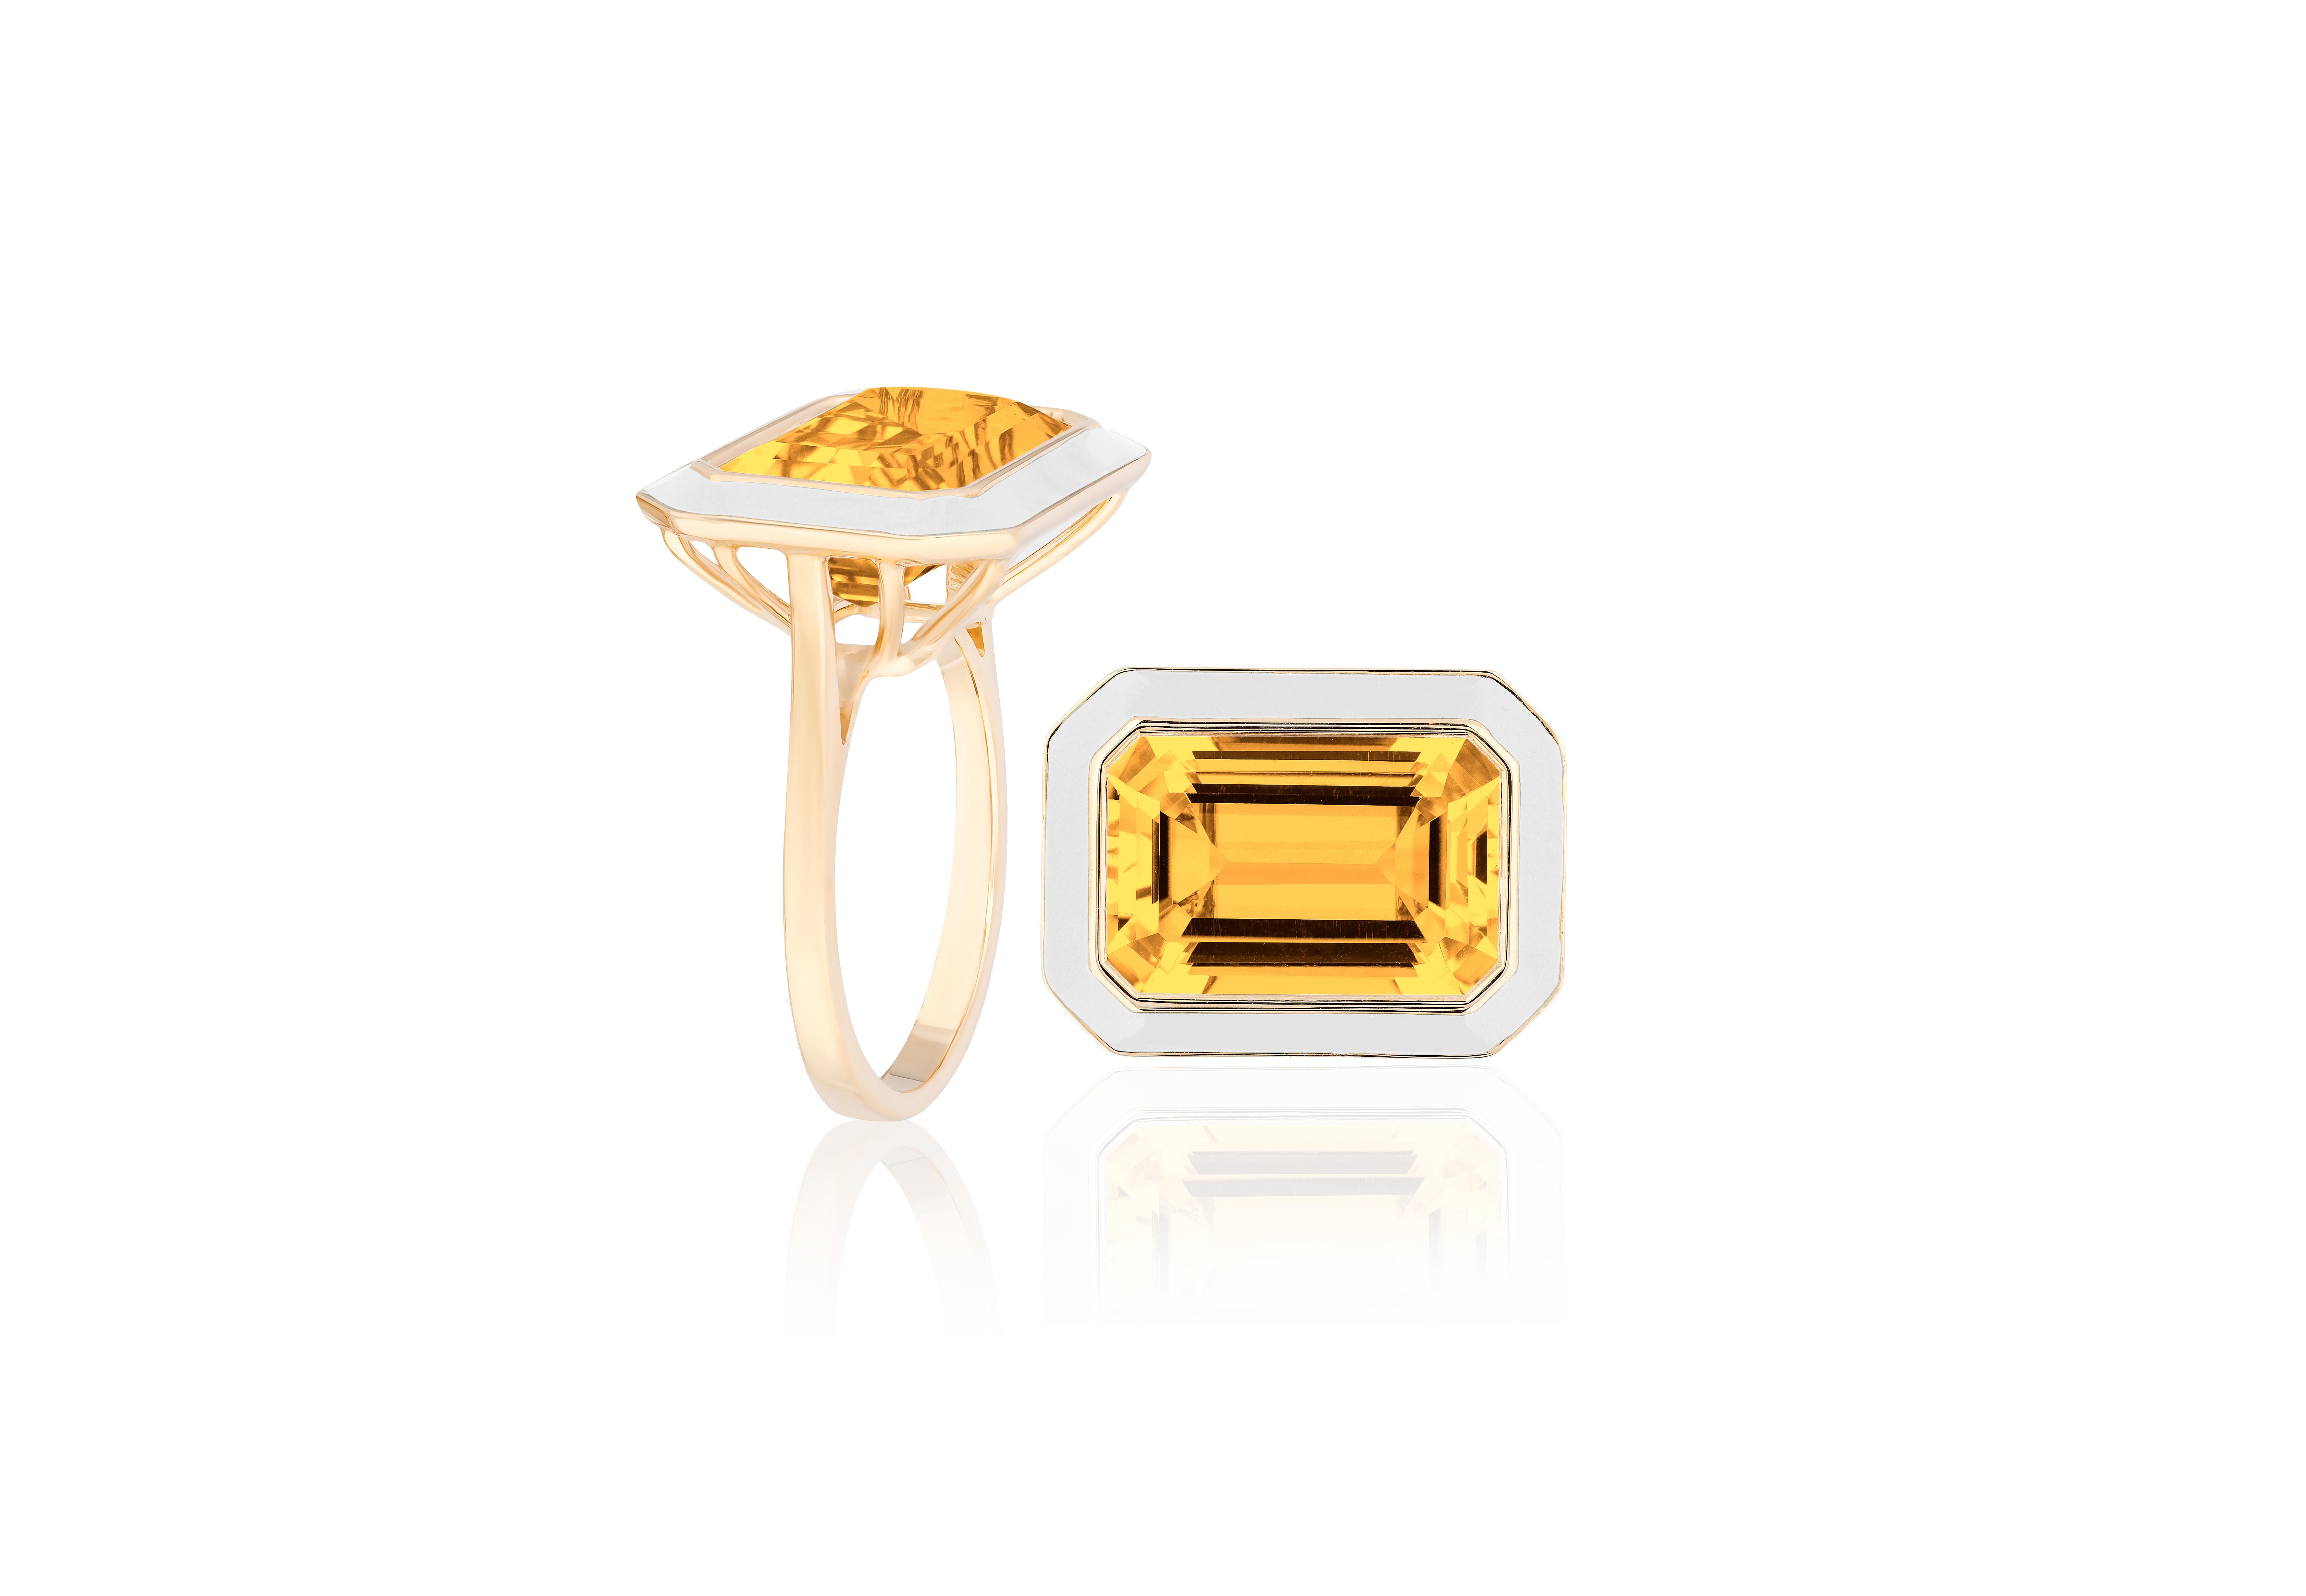 East-West Citrine Ring with White Enamel in 18K Yellow Gold, from 'Queen' Collection. The combination of enamel and Citrine represents power, richness and passion of a true Queen. The feeling of luxury is what we’re aiming for. This will be your